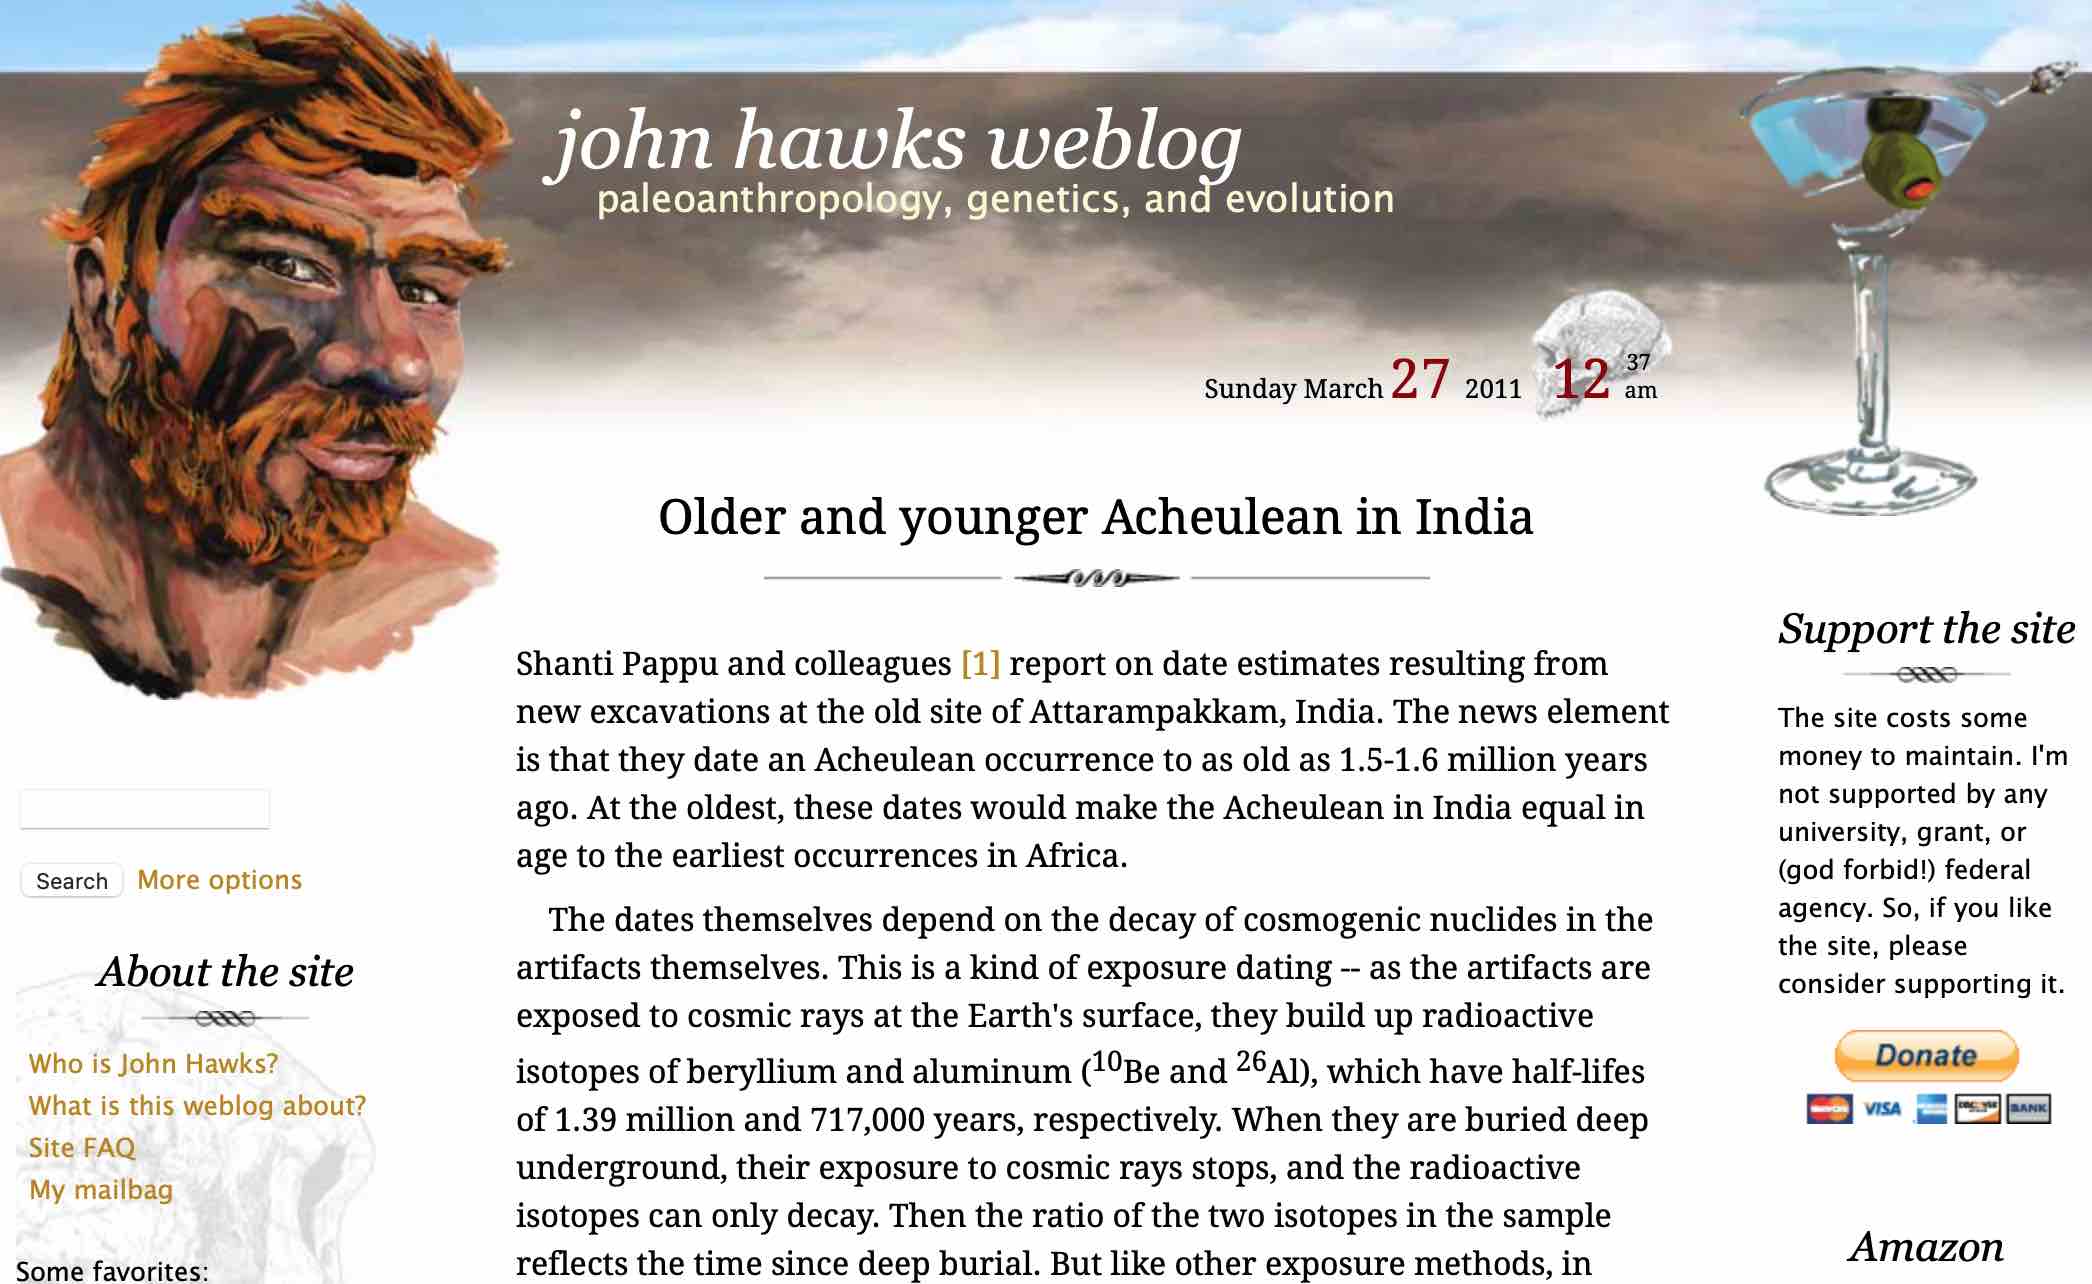 Front page of johnhawks.net in 2011